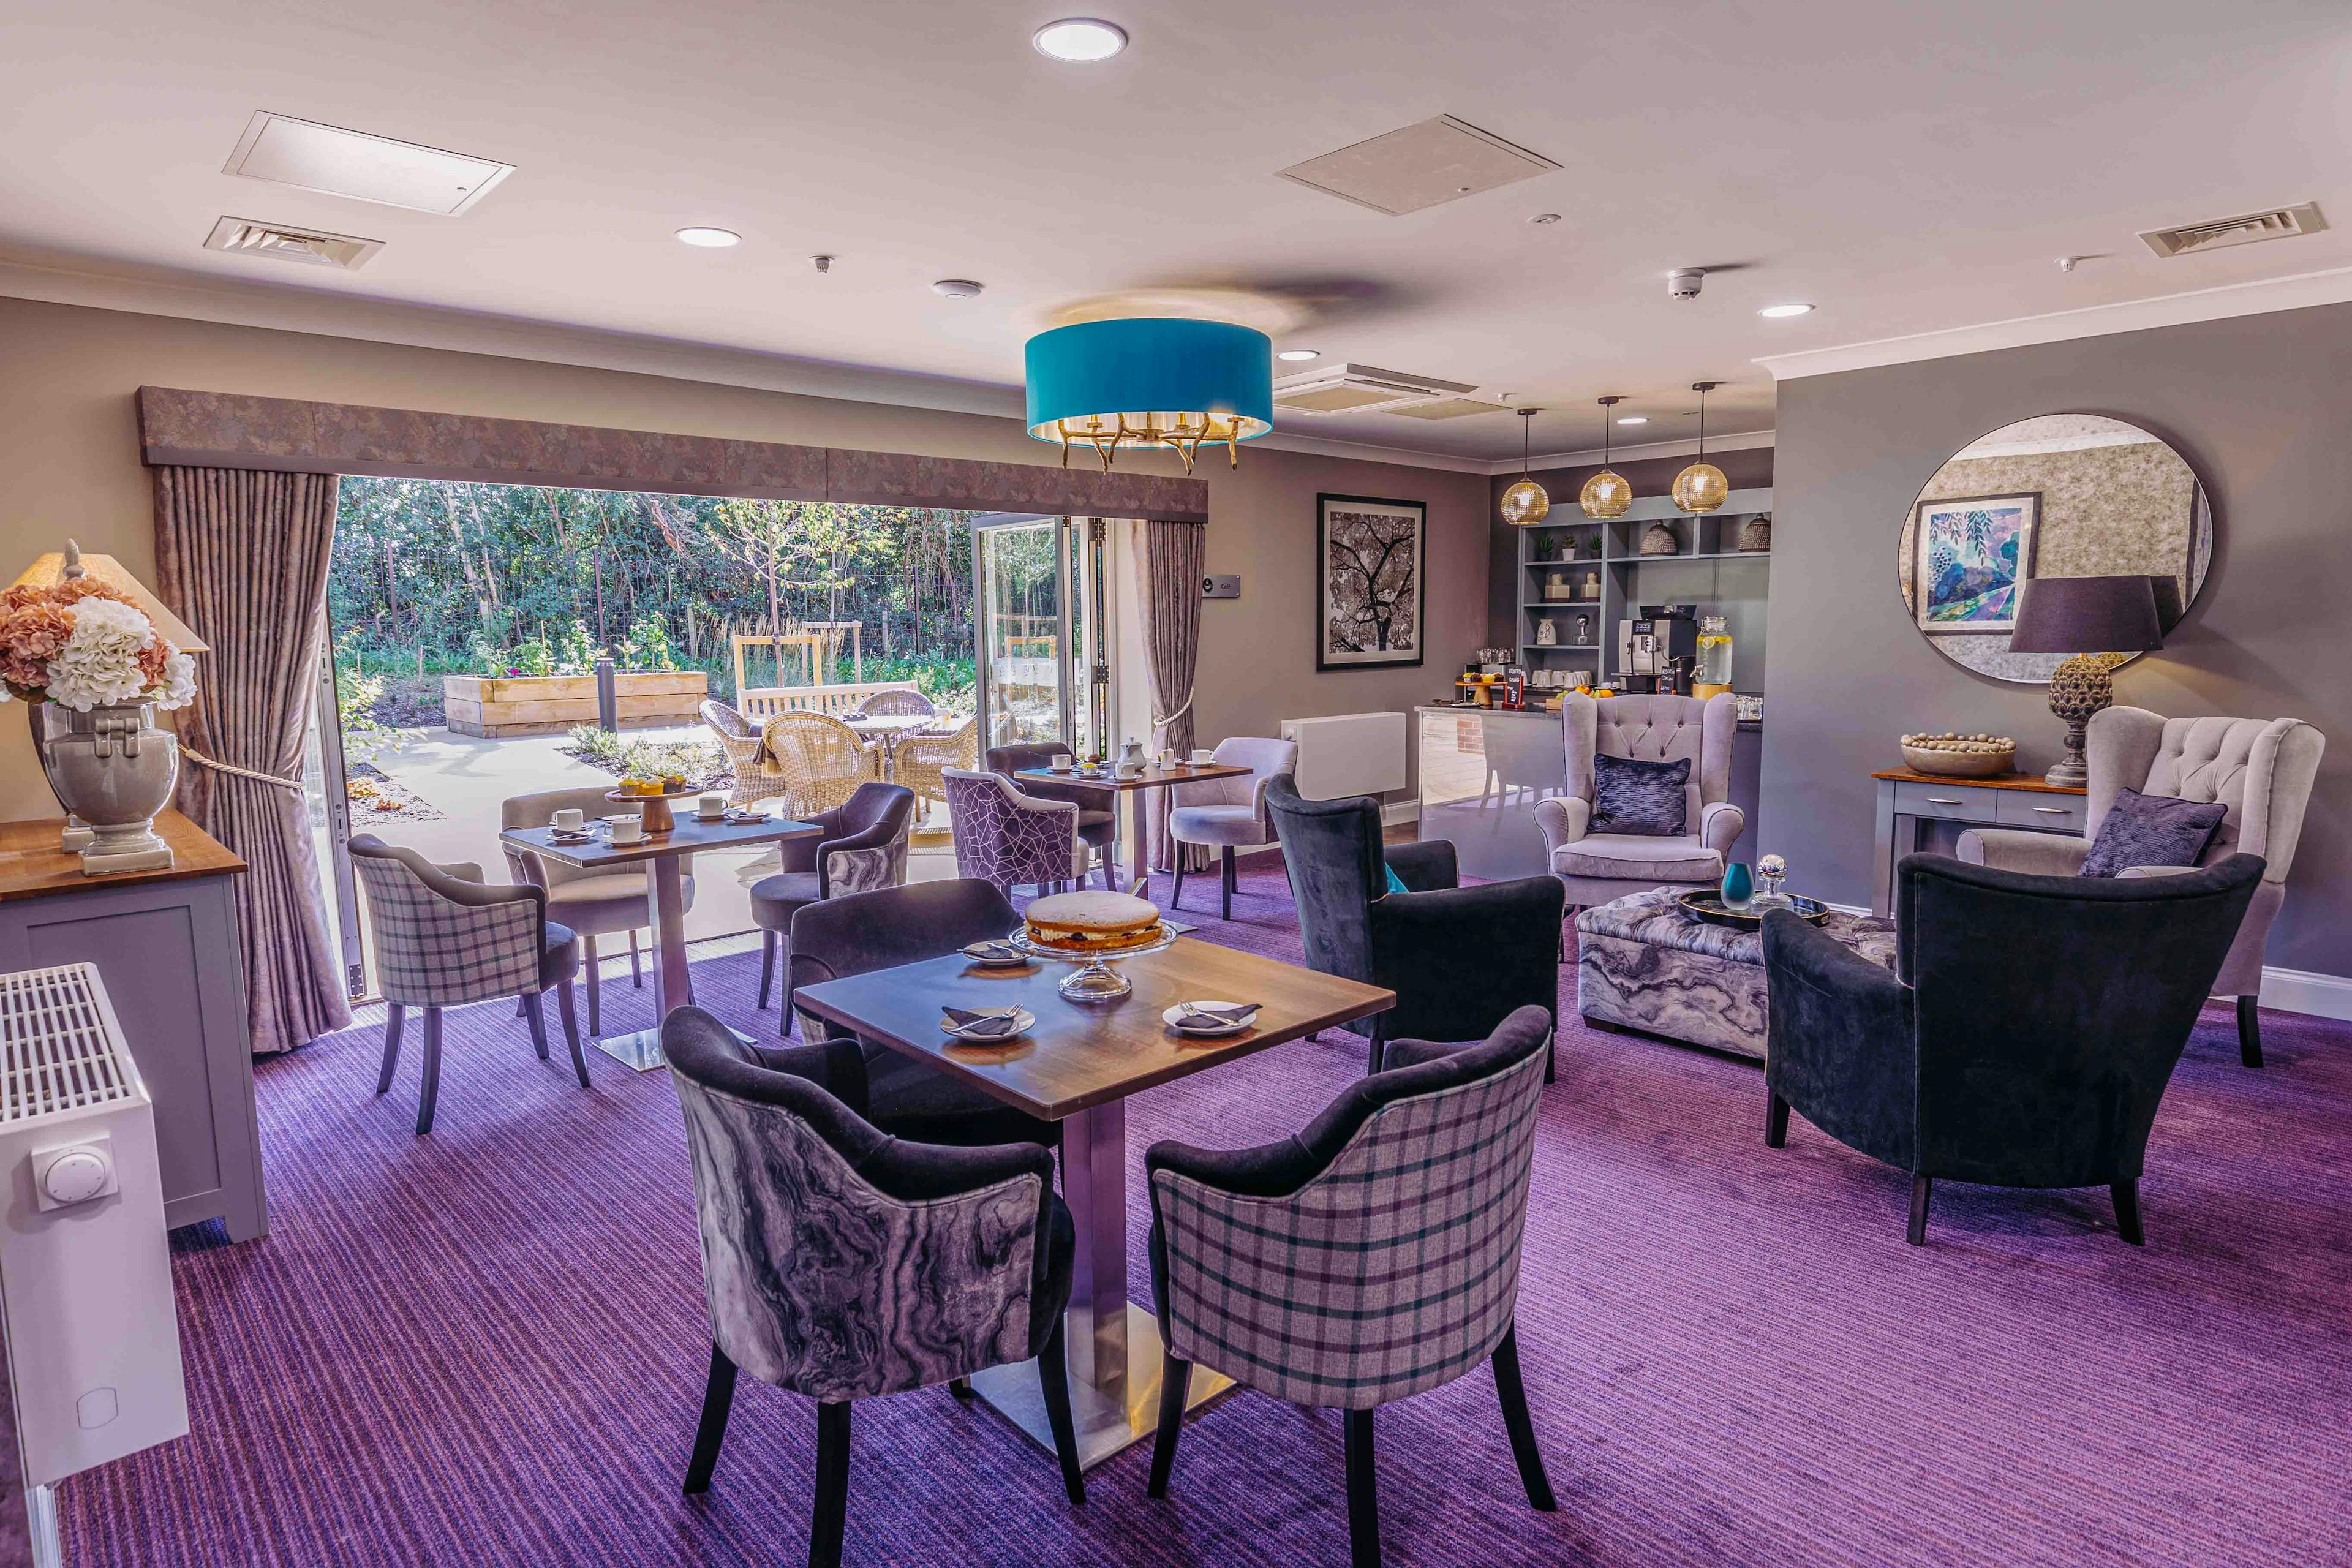 Cafe at Bere Grove Care Home in Horndean, East Hampshire